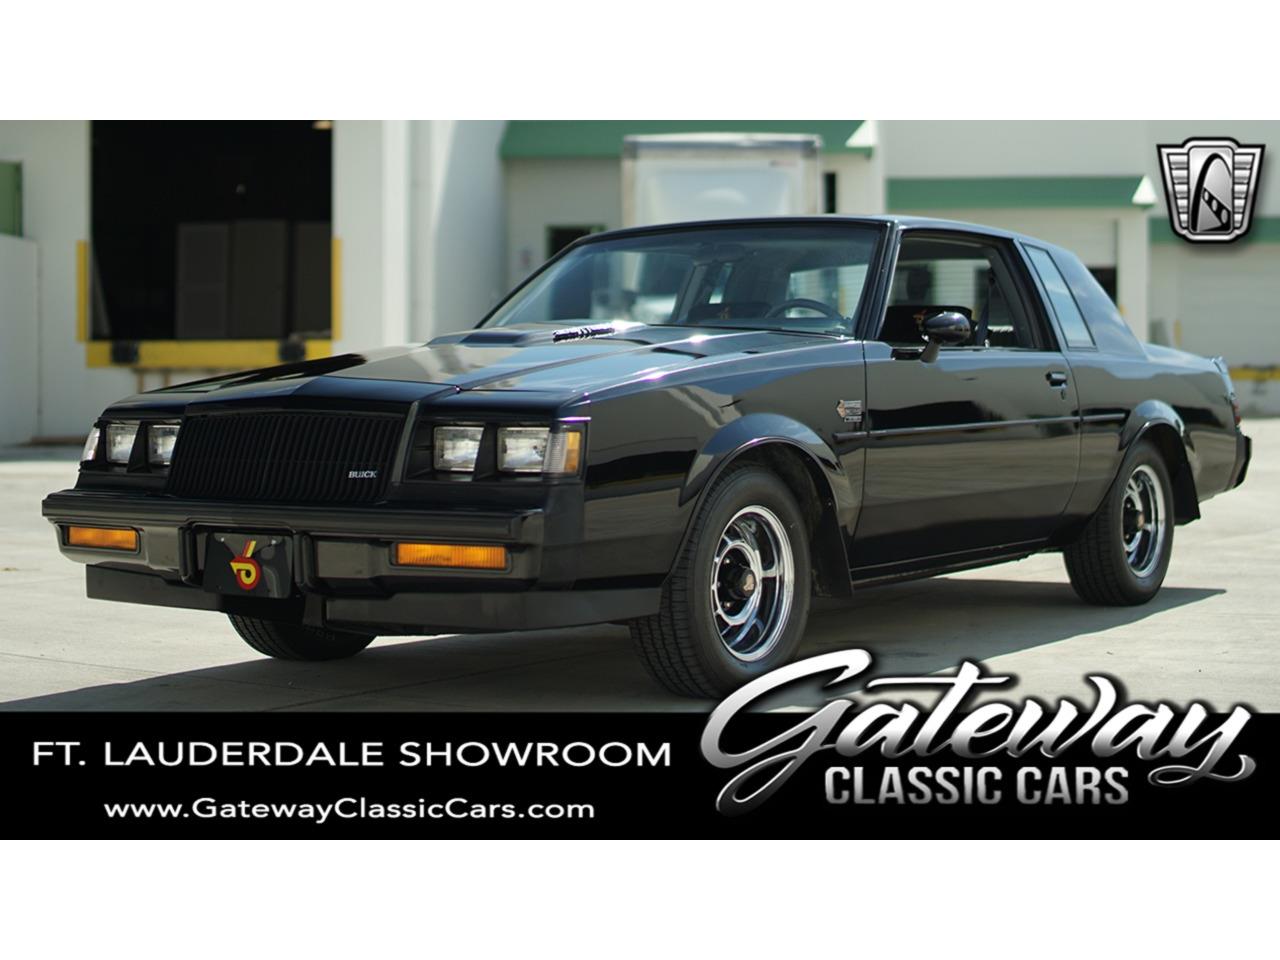 for sale 1987 buick grand national in o fallon, illinois for sale in o fallon, il